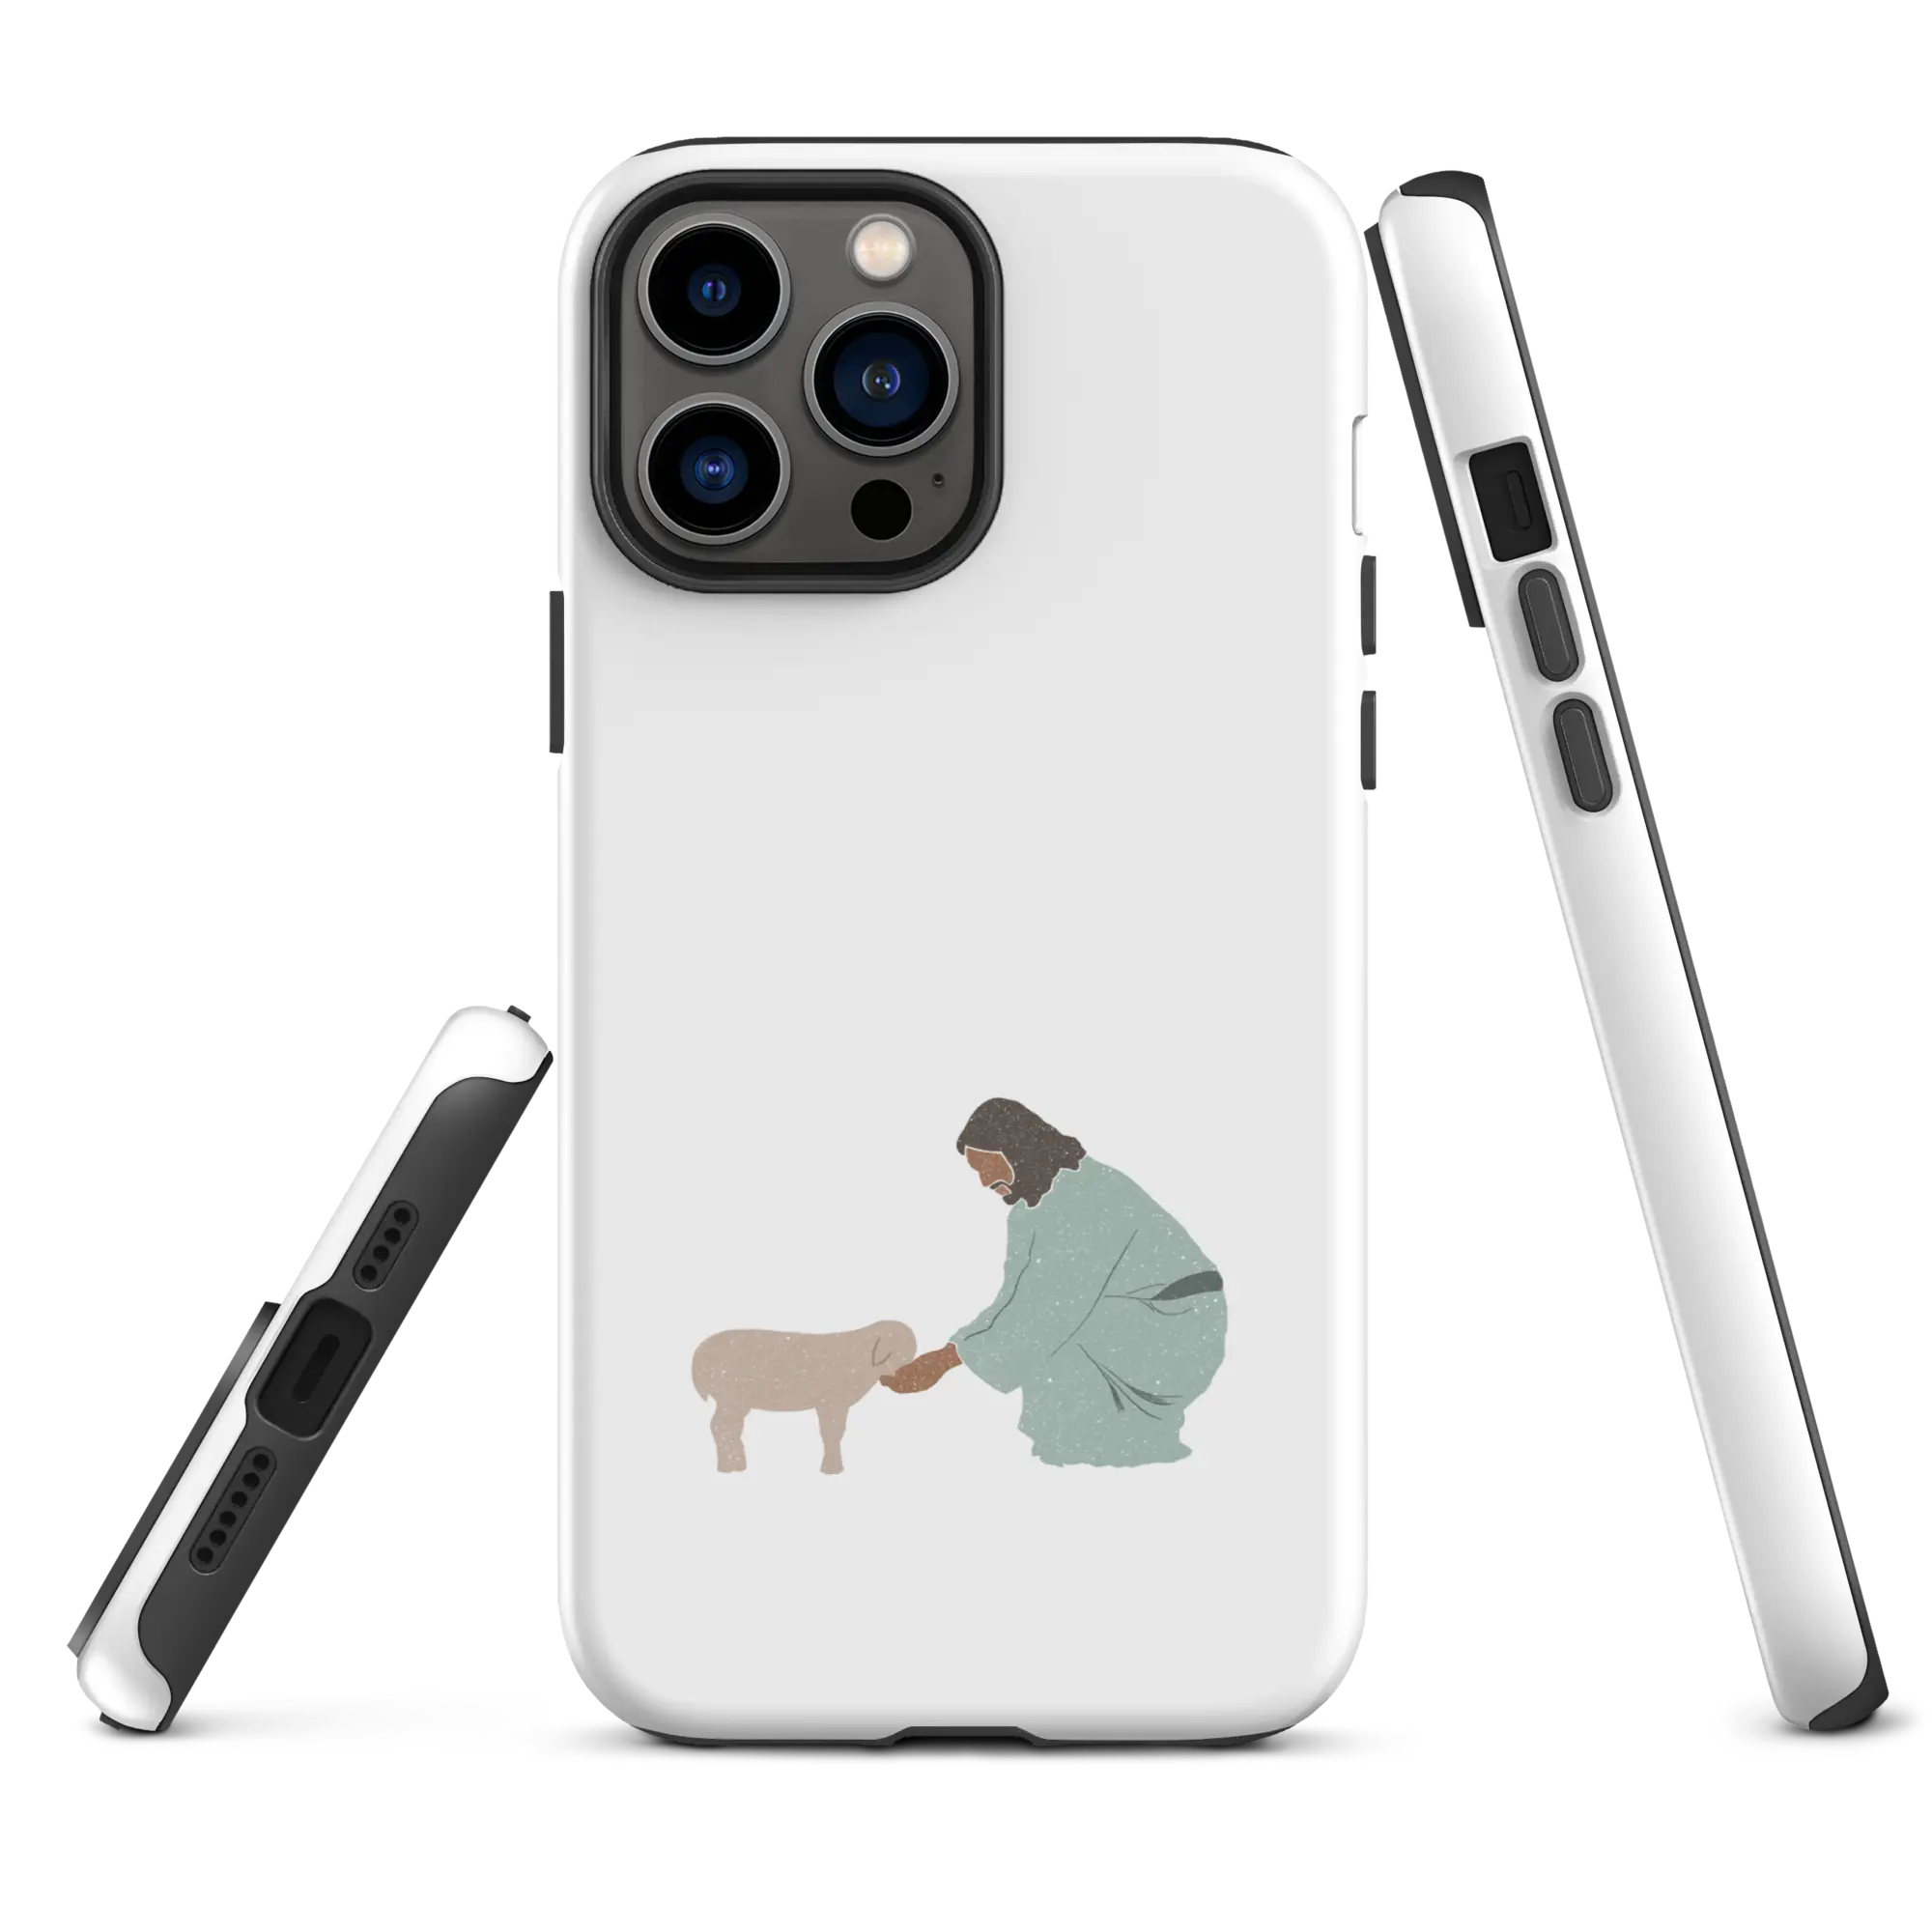 Durable Christian iPhone cover showcasing a serene illustration of Jesus as the Good Shepherd with a lamb